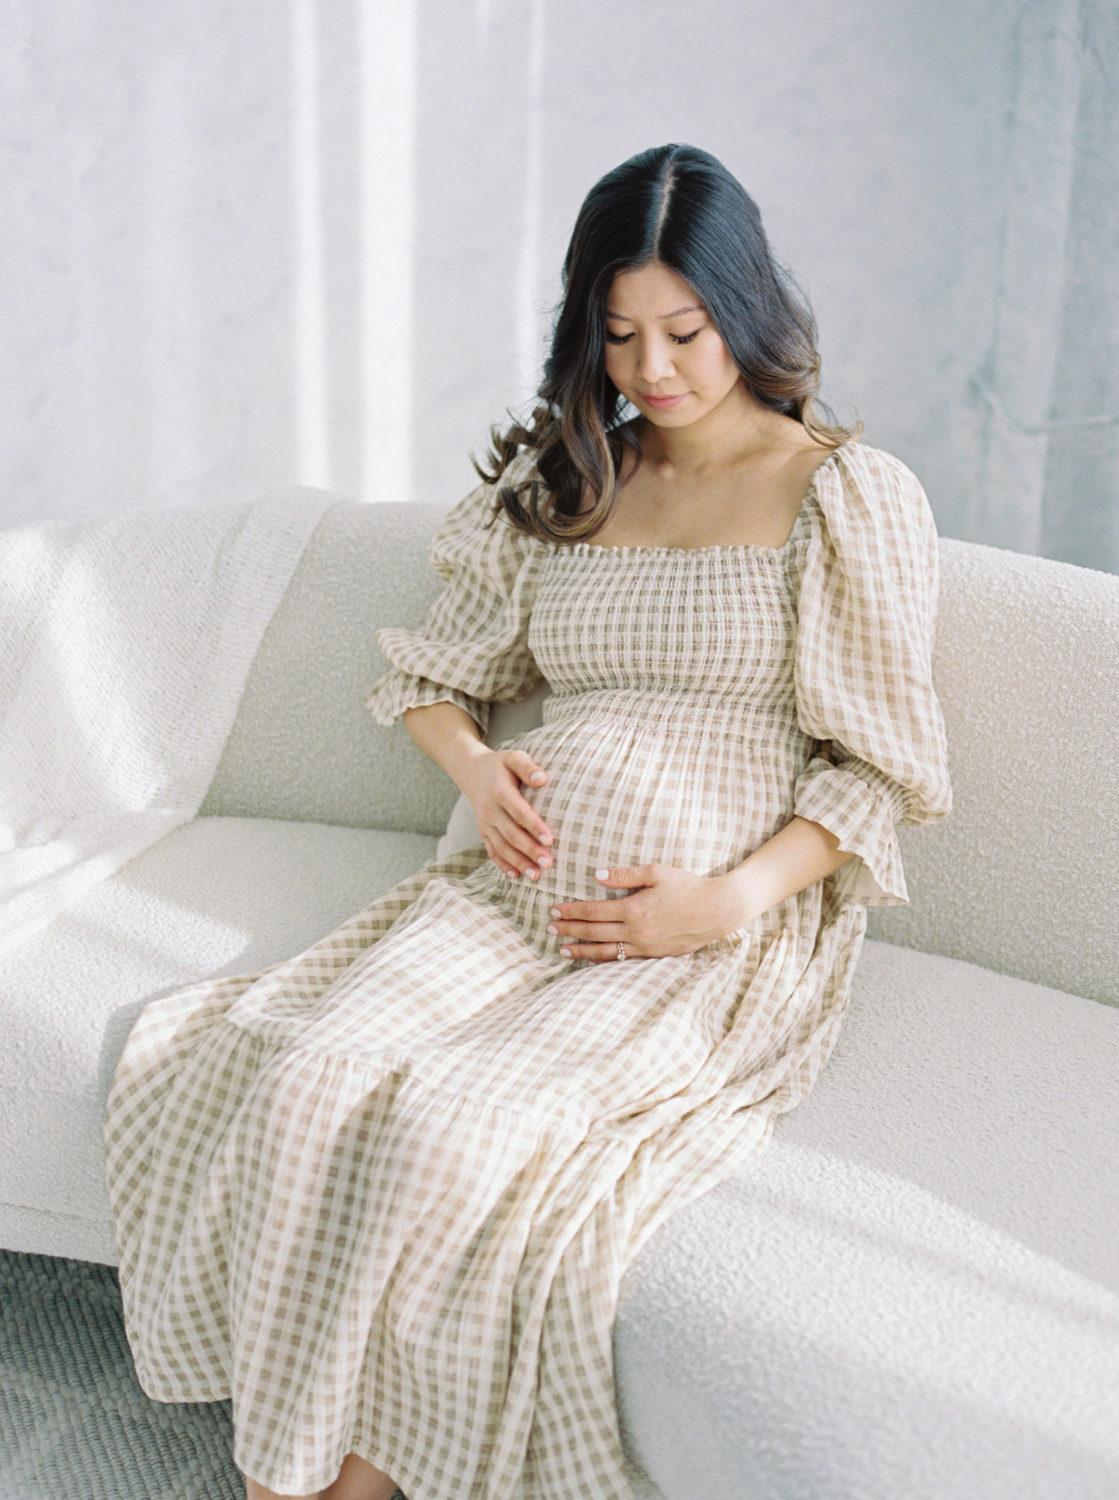 pregnant woman sitting down on a white couch holding her belly in a light gray photo studio